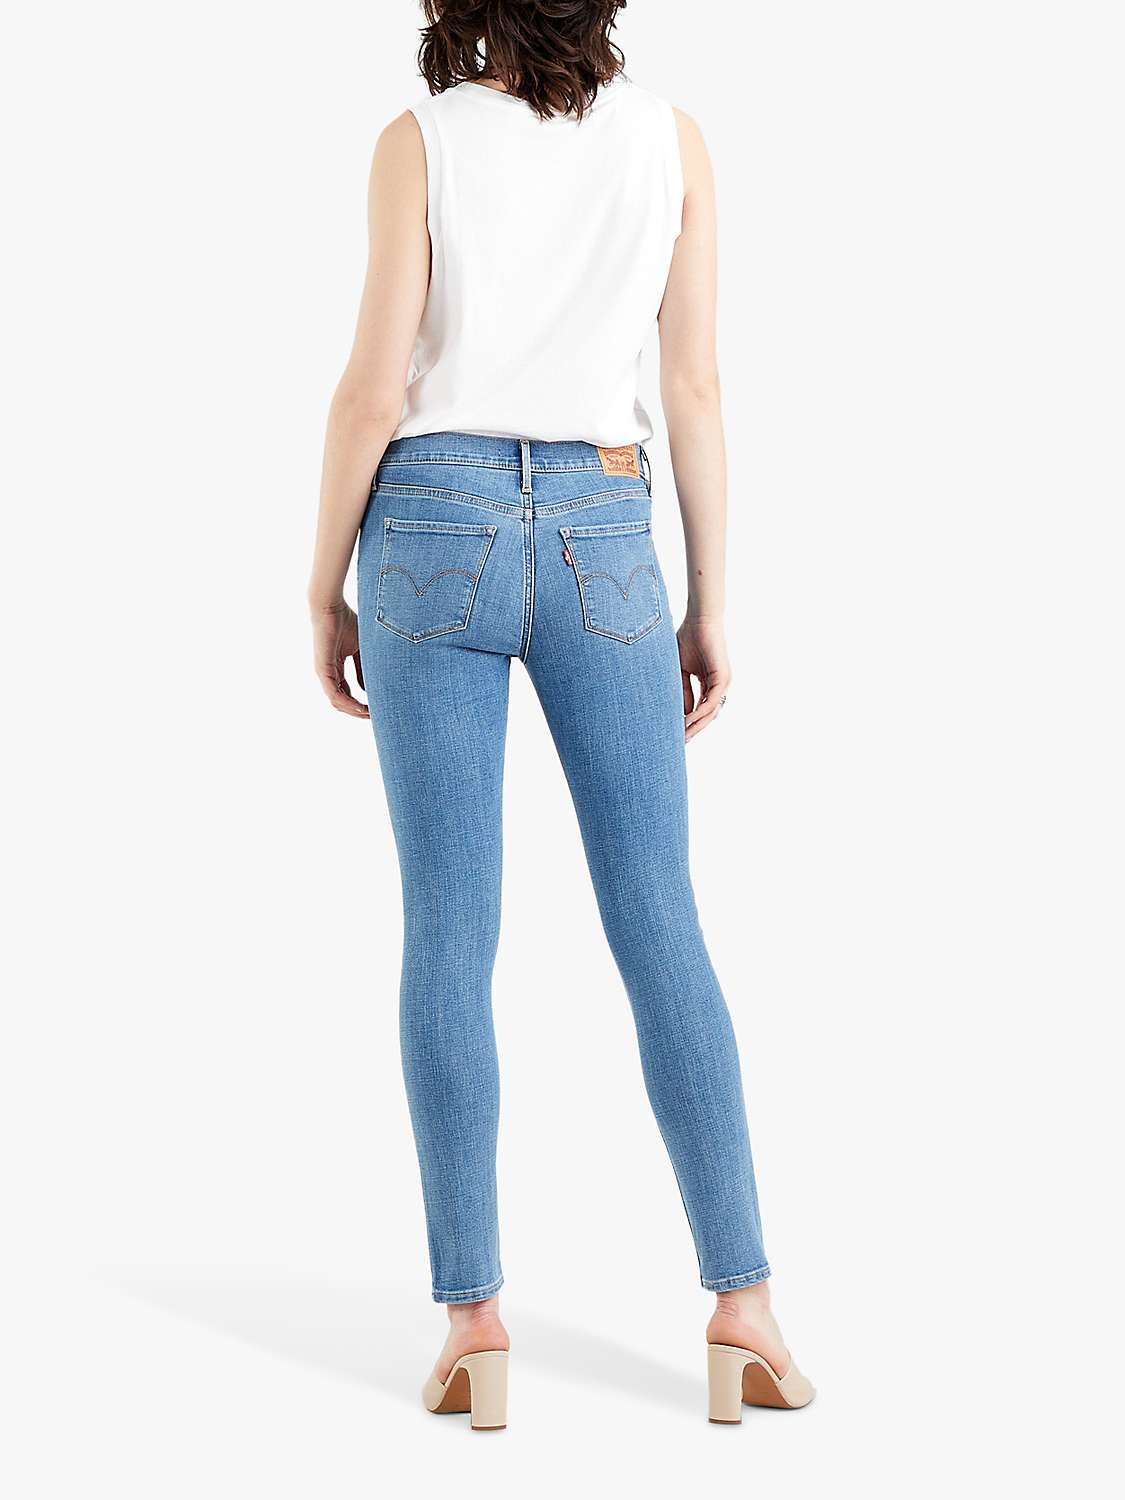 Buy Levi's 311 Shaping Skinny Jeans, Slate Will Online at johnlewis.com